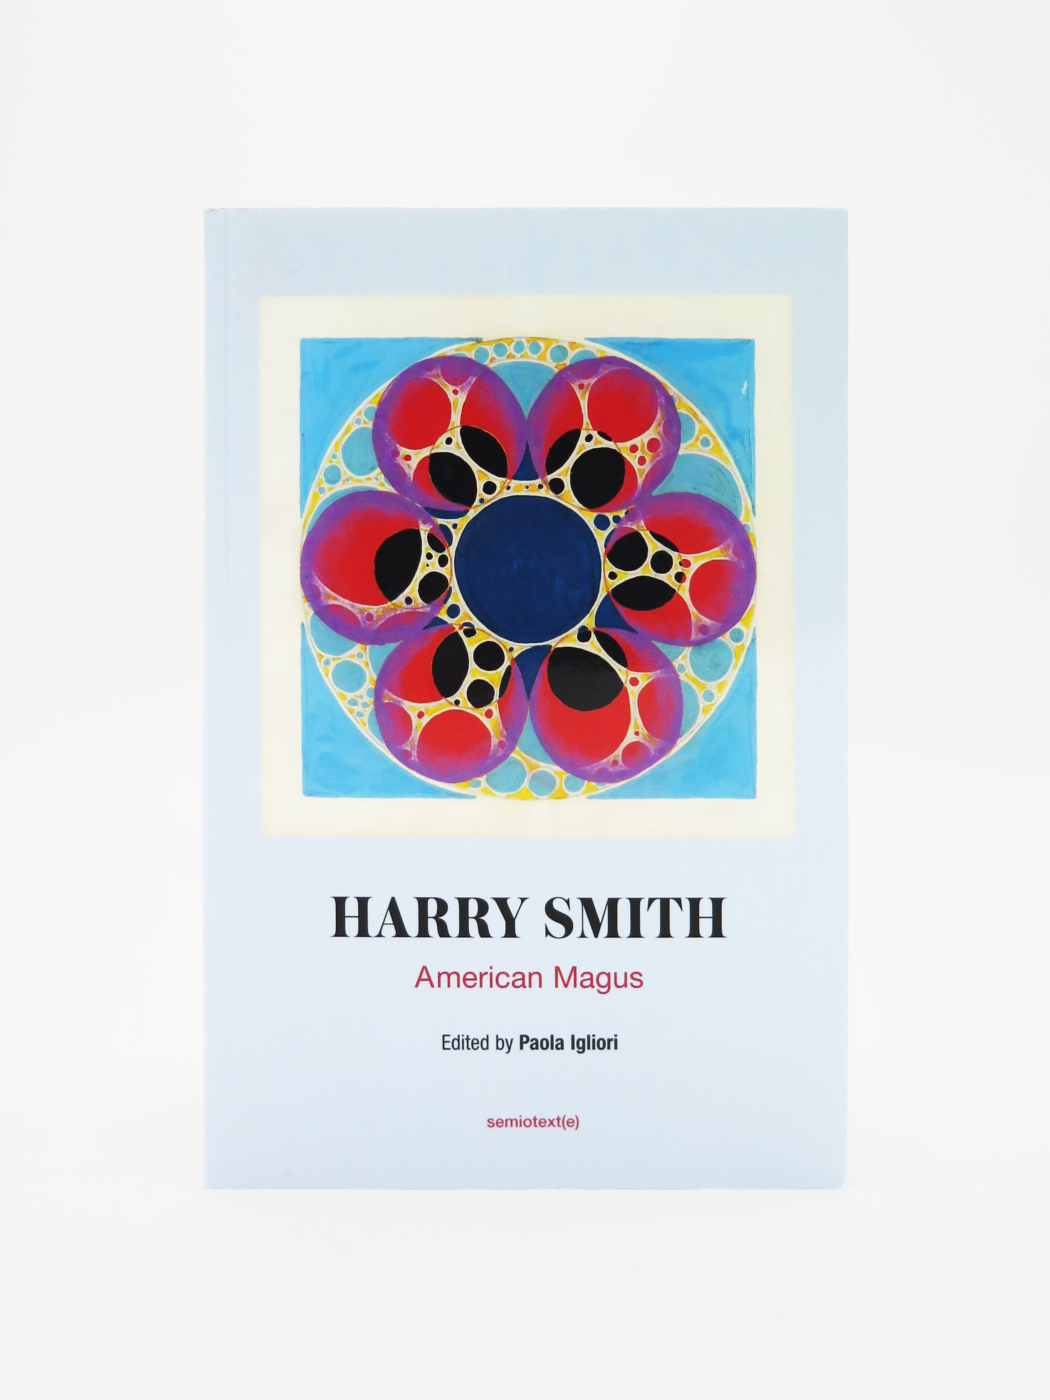 Harry Smith, American Magus